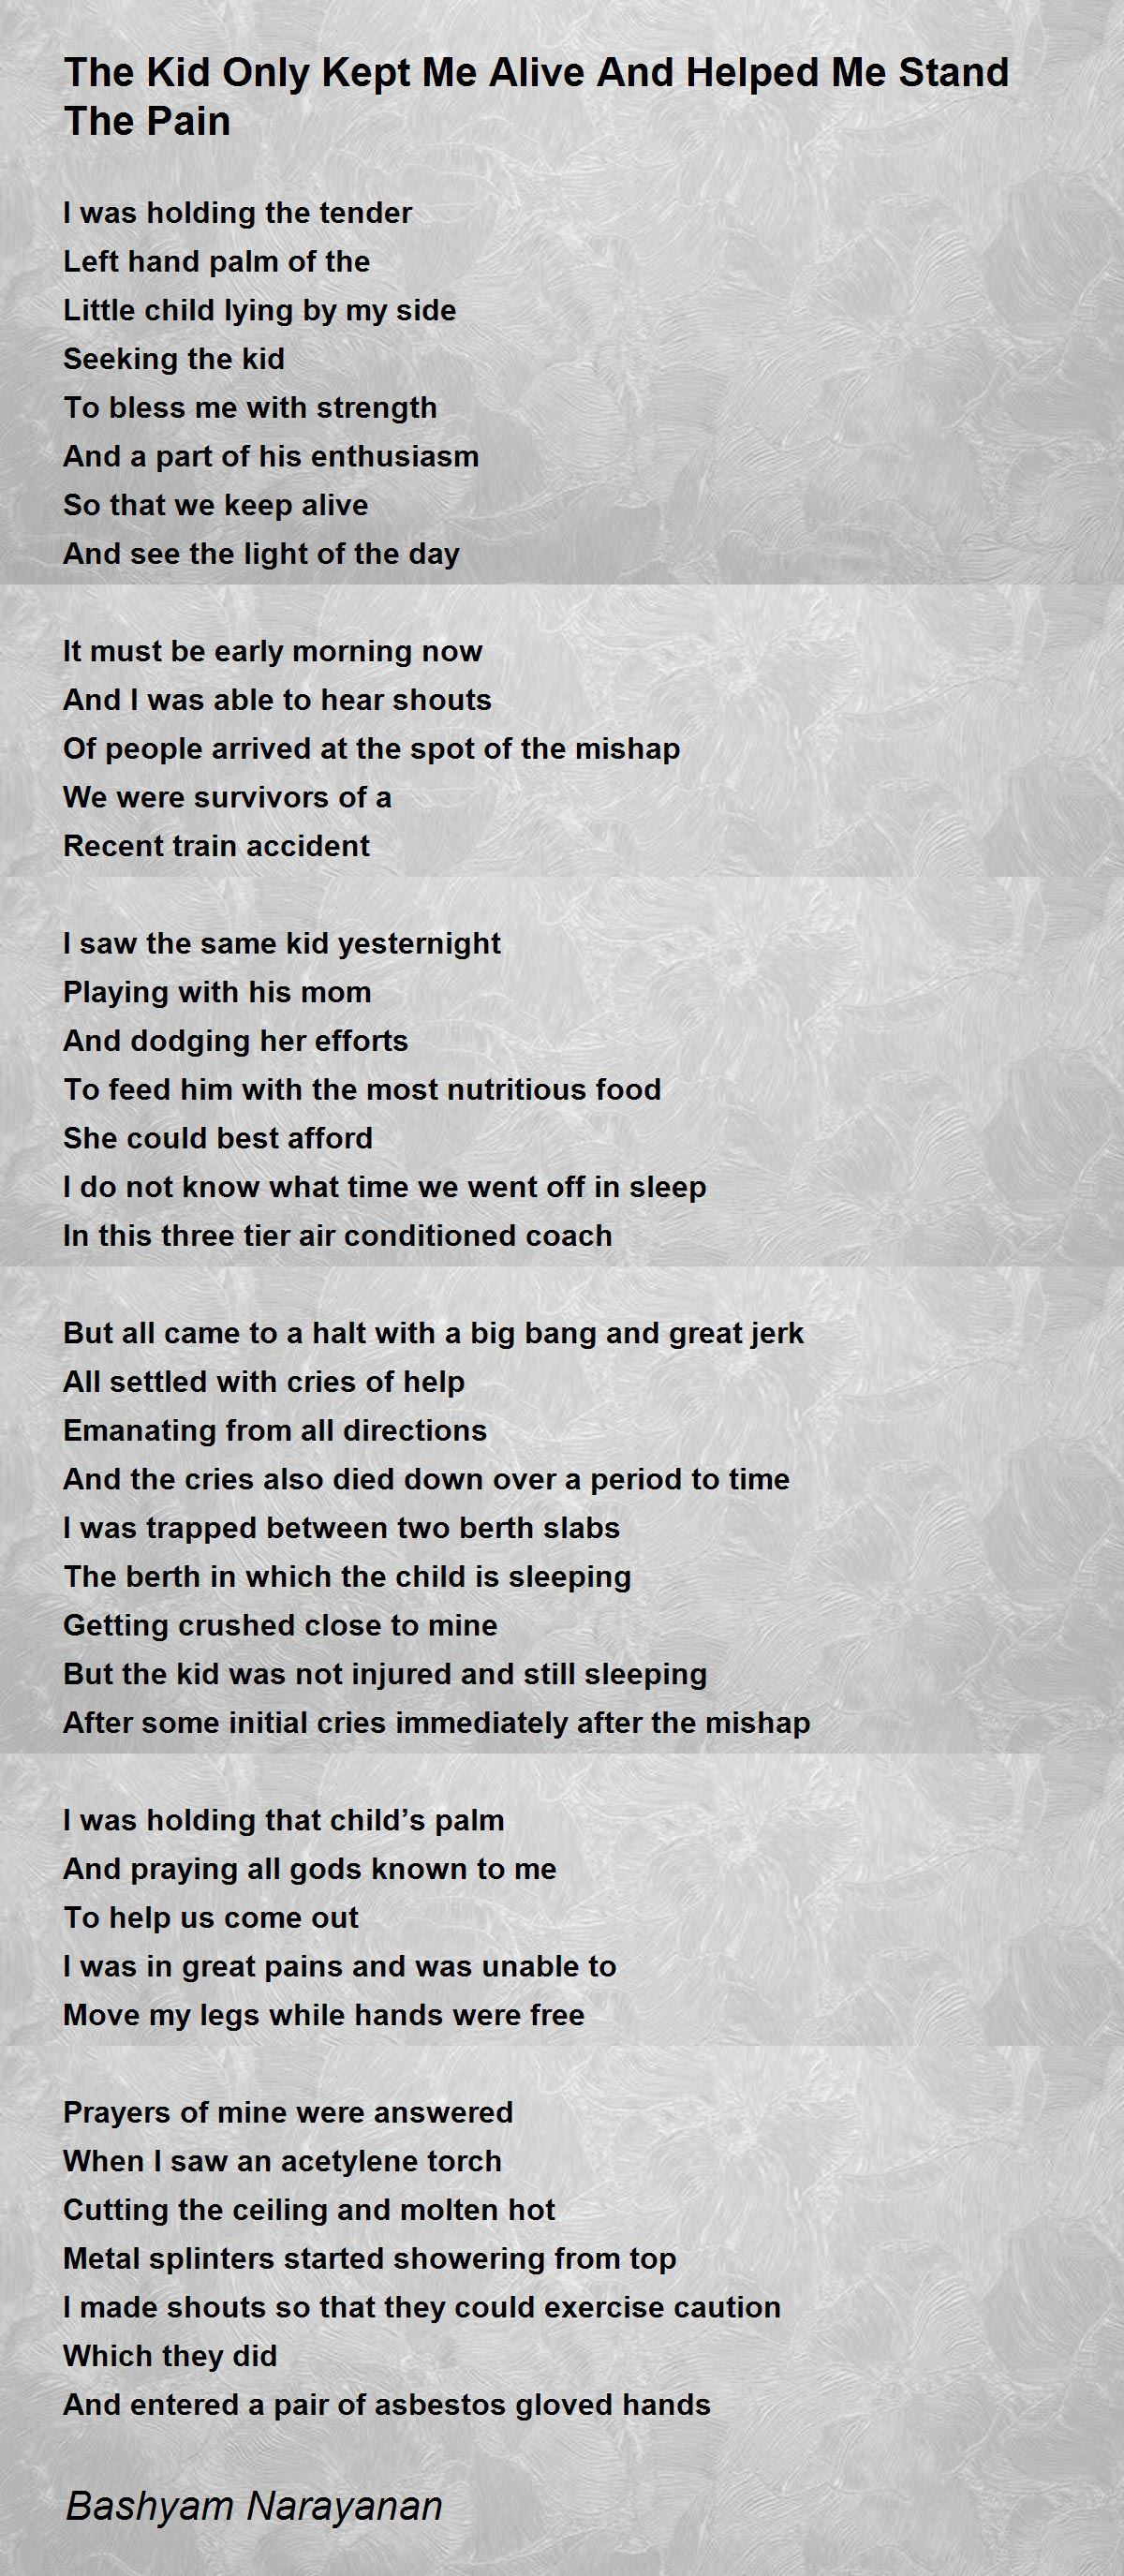 The Kid Only Kept Me Alive And Helped Me Stand The Pain By Bashyam Narayanan The Kid Only Kept Me Alive And Helped Me Stand The Pain Poem